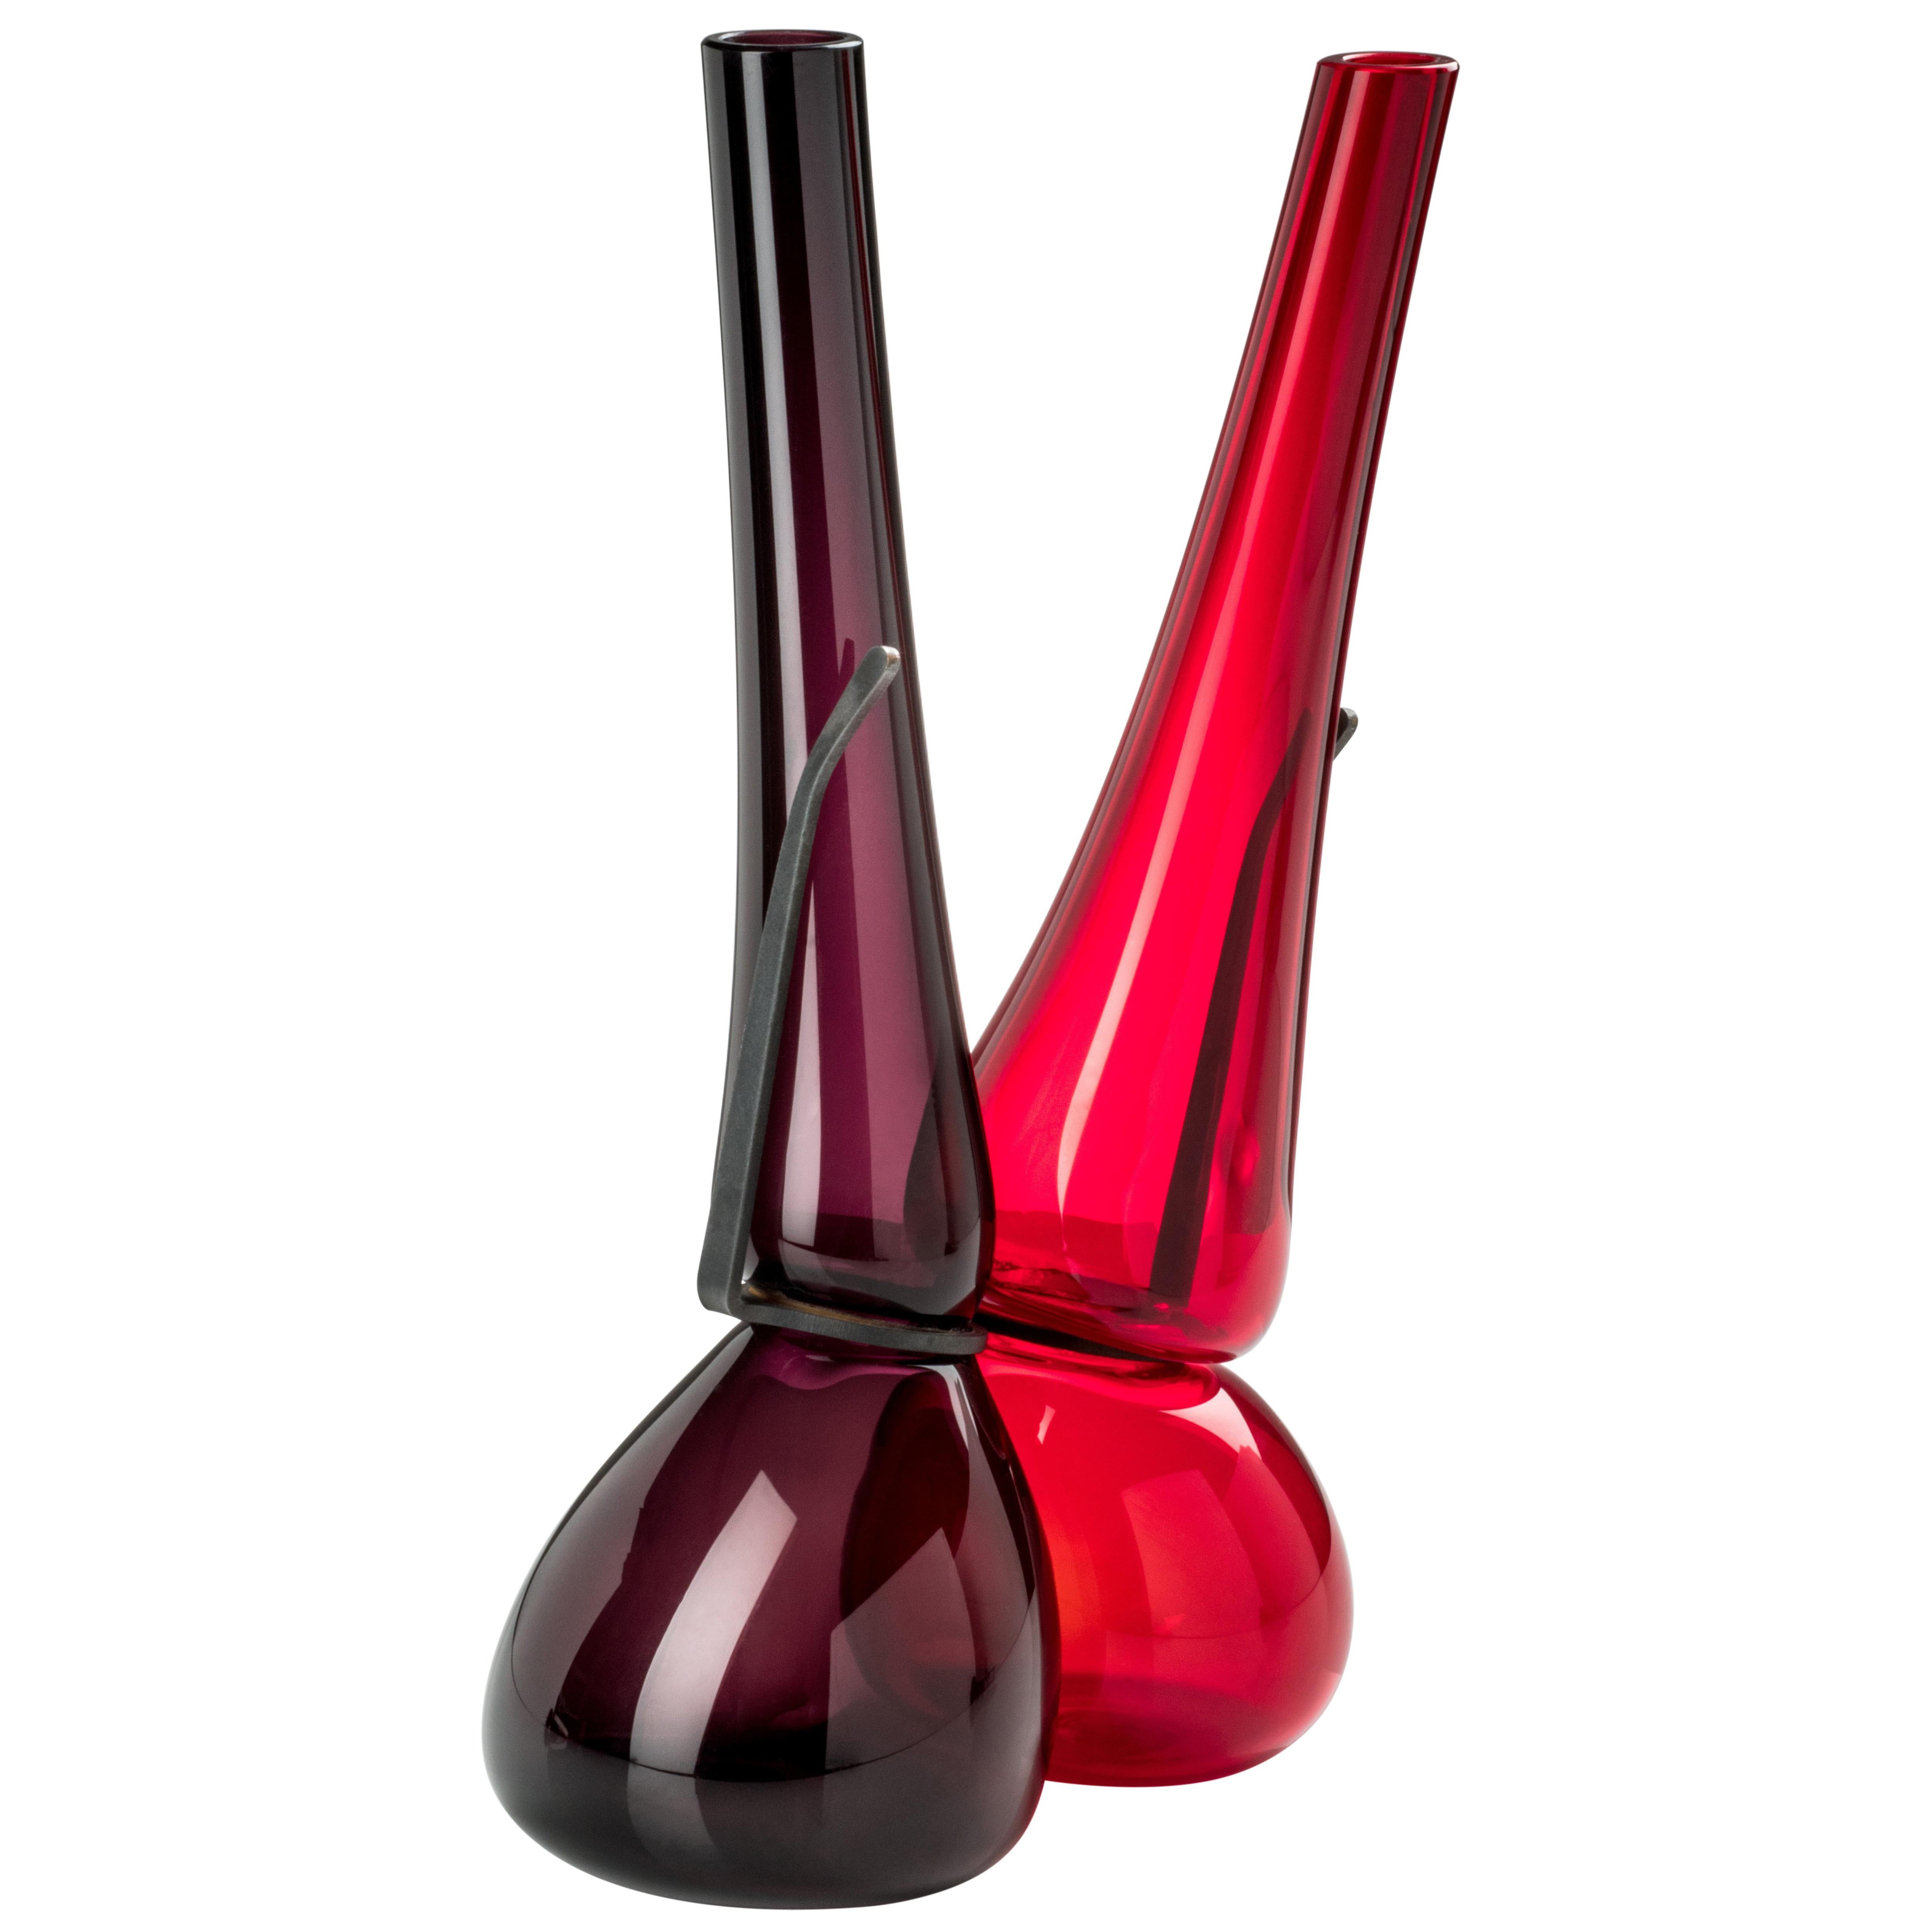 Venini 'Where Are My Glasses?' Double Lens Vase in Red and Violet by Ron Arad